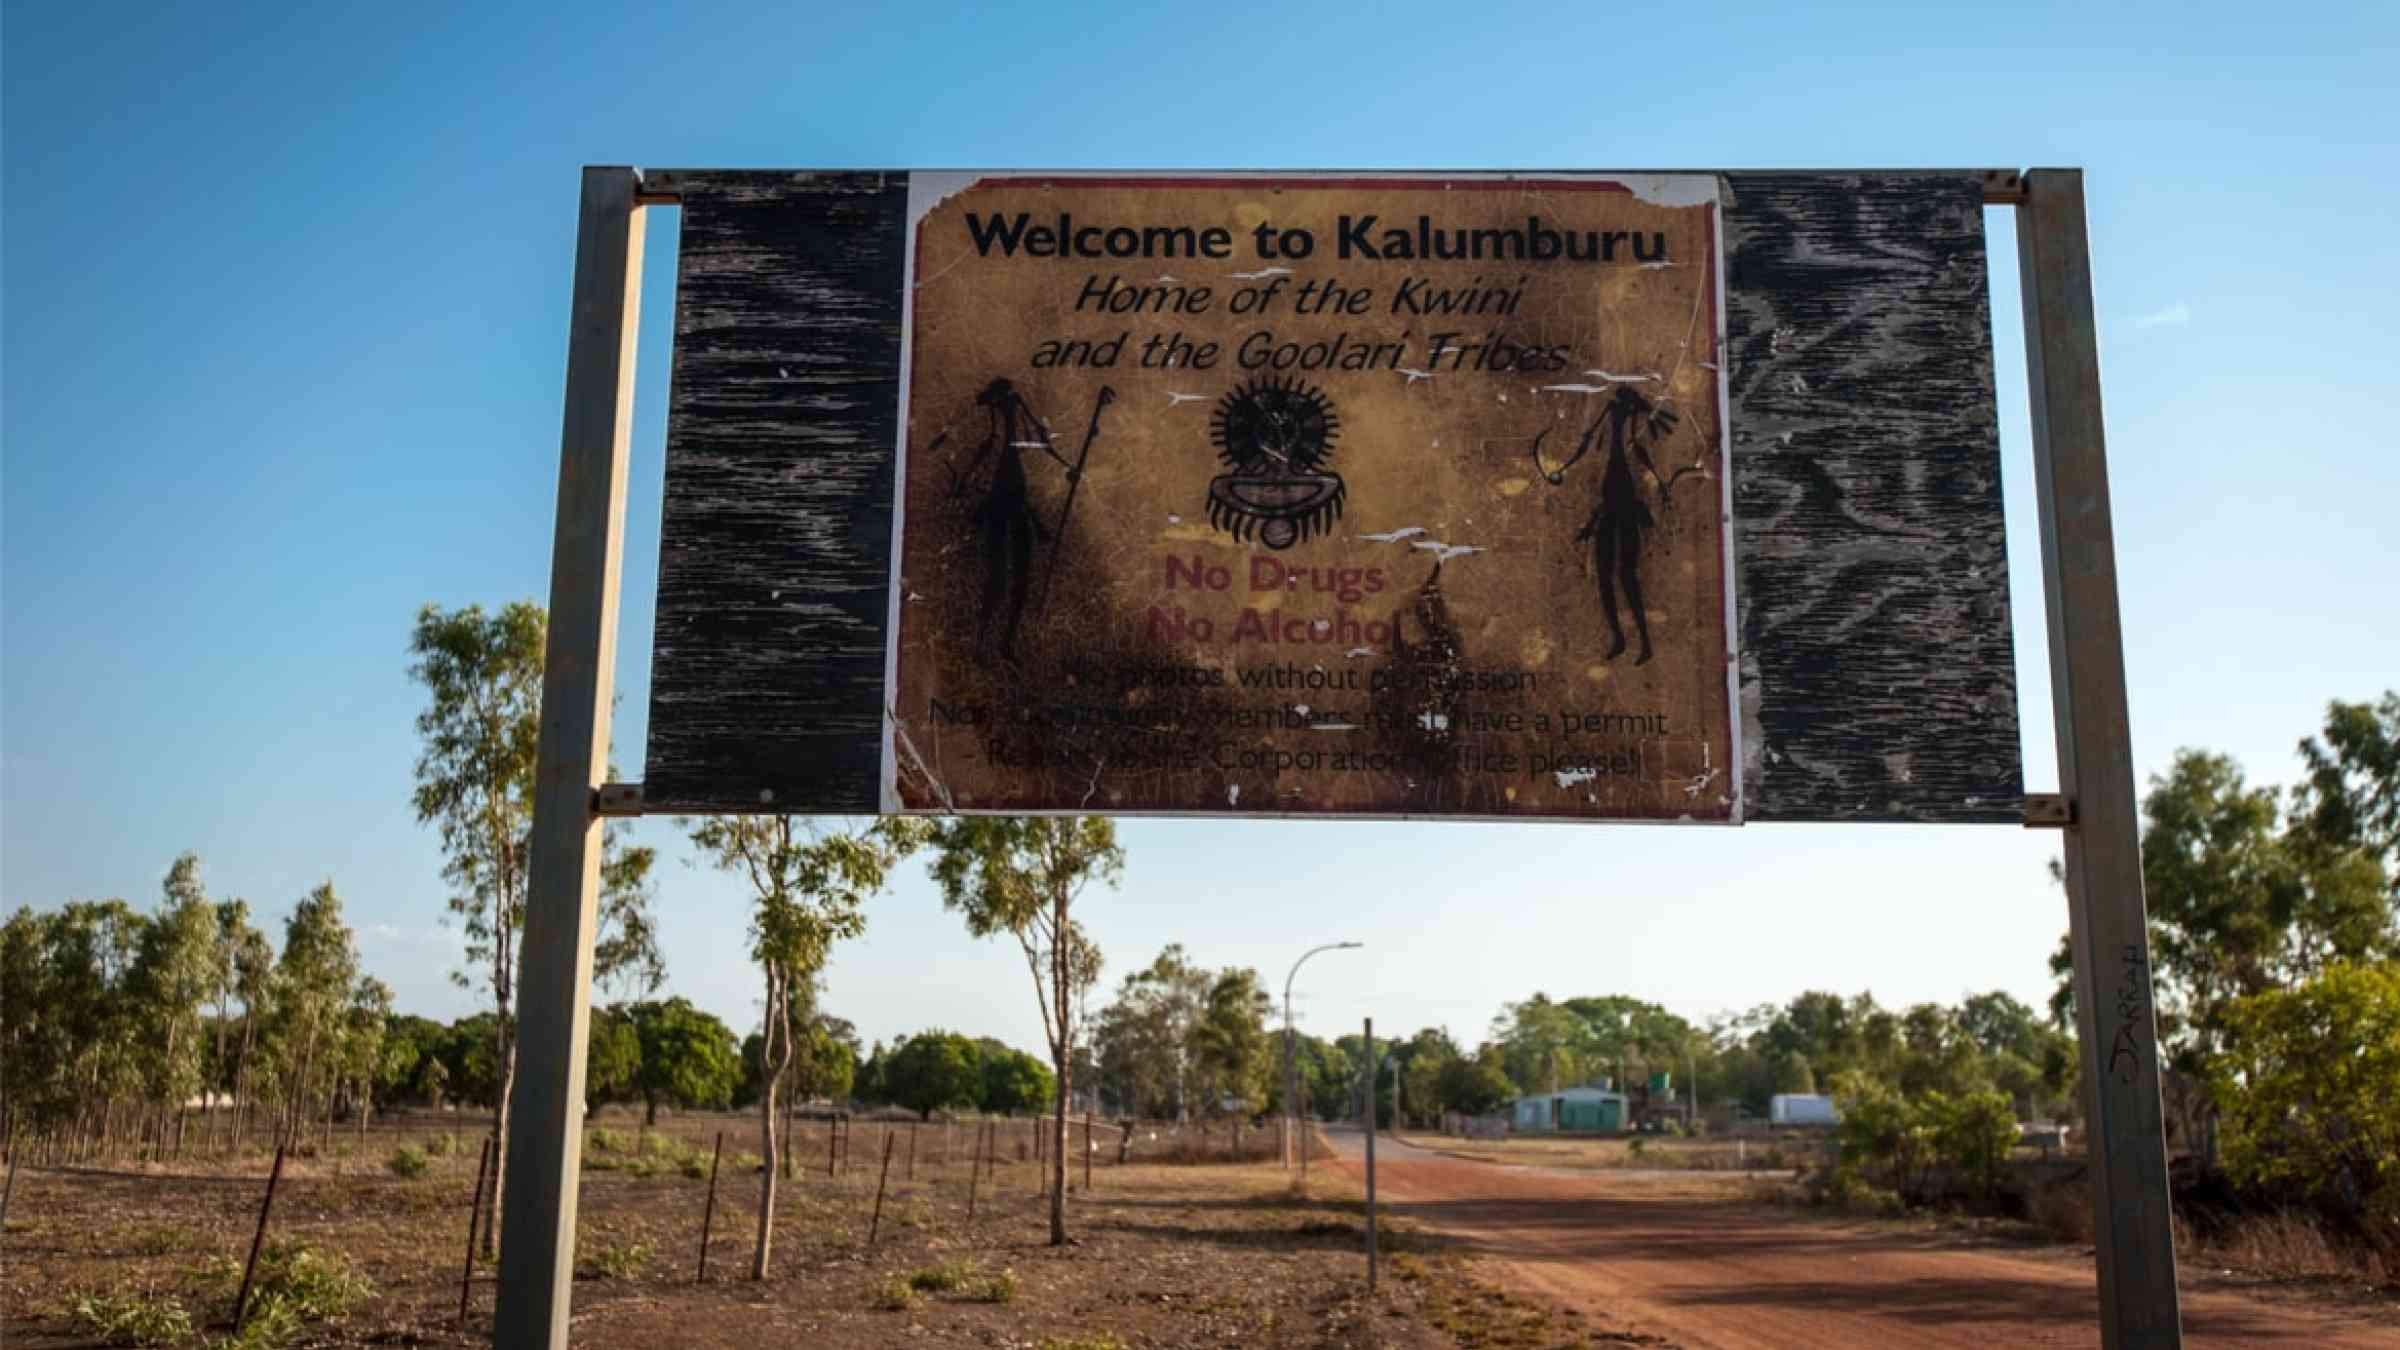 Welcome to Kalumburu sign at the entrance to a remote outback Aboriginal community in Western Australia's Kimberley region (2013)